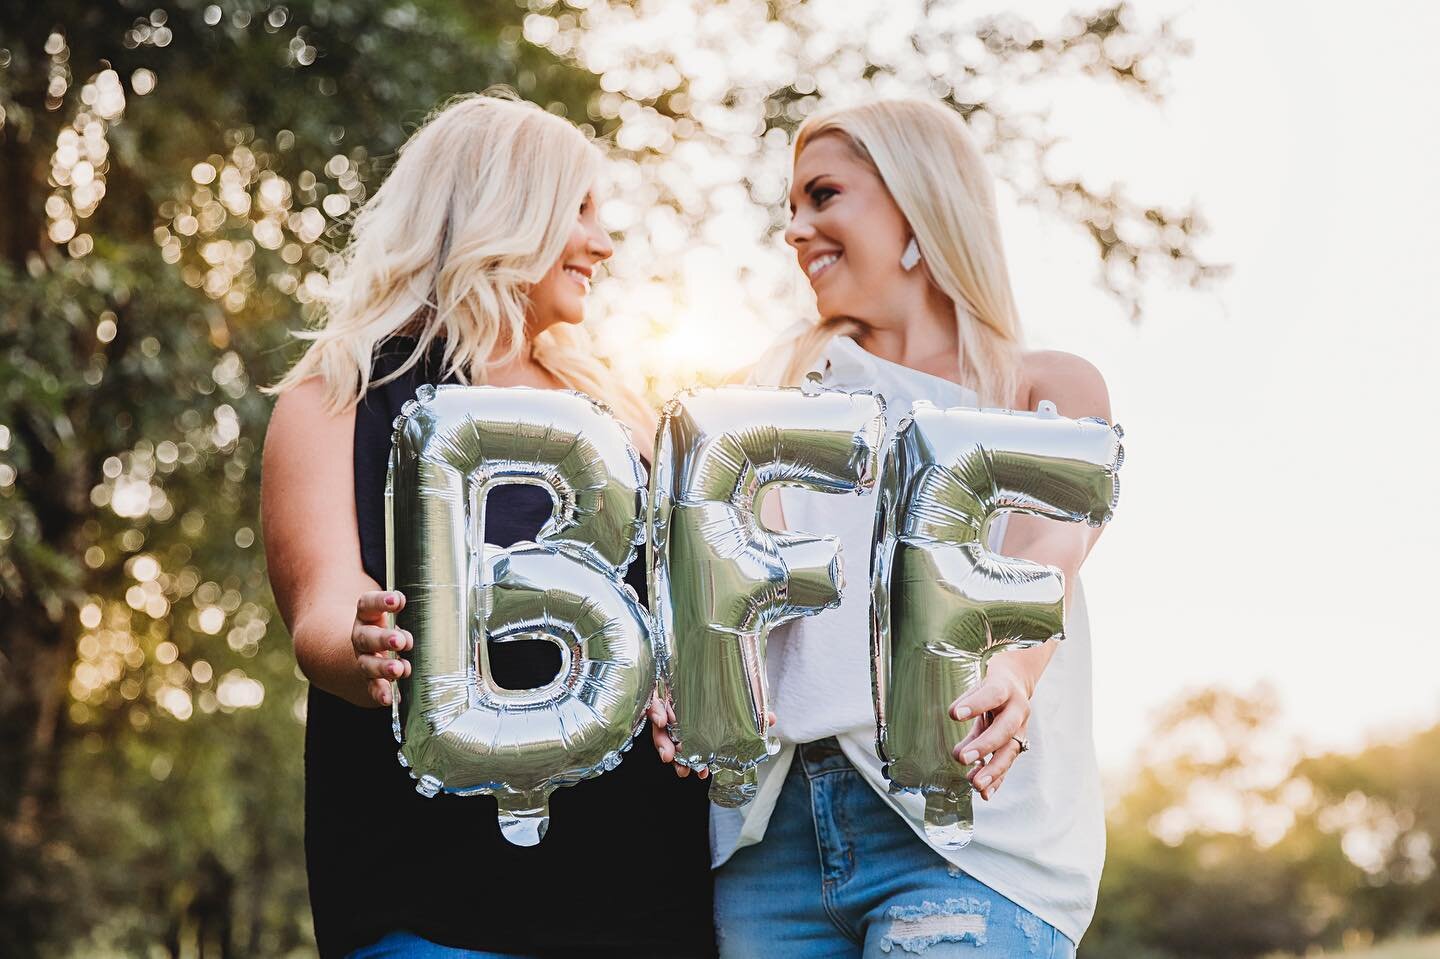 Bestie session for the most fun Mommas on the planet! What started out in heels and curls, ended with bare-feet and a food fight! 😆🤍 #bestfriends #bff #foodfight